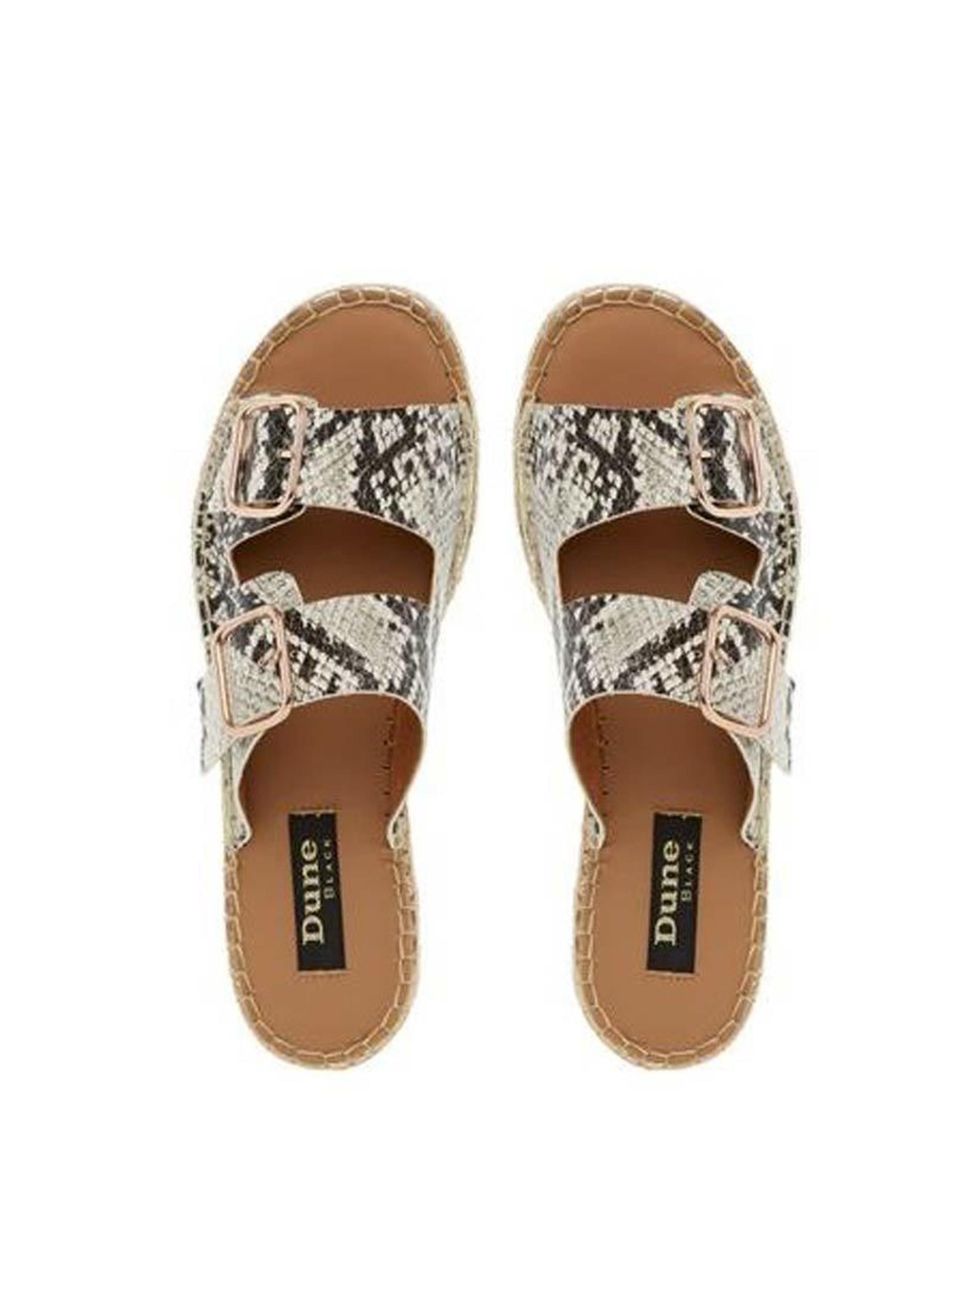 <p>We might even brave a bare toe this weekend. Emphasis on brave.</p>

<p><a href="http://www.dunelondon.com/linzi-double-strap-espadrille-sandal-0851501530003138/" target="_blank">Dune</a> espadrilles, £99</p>